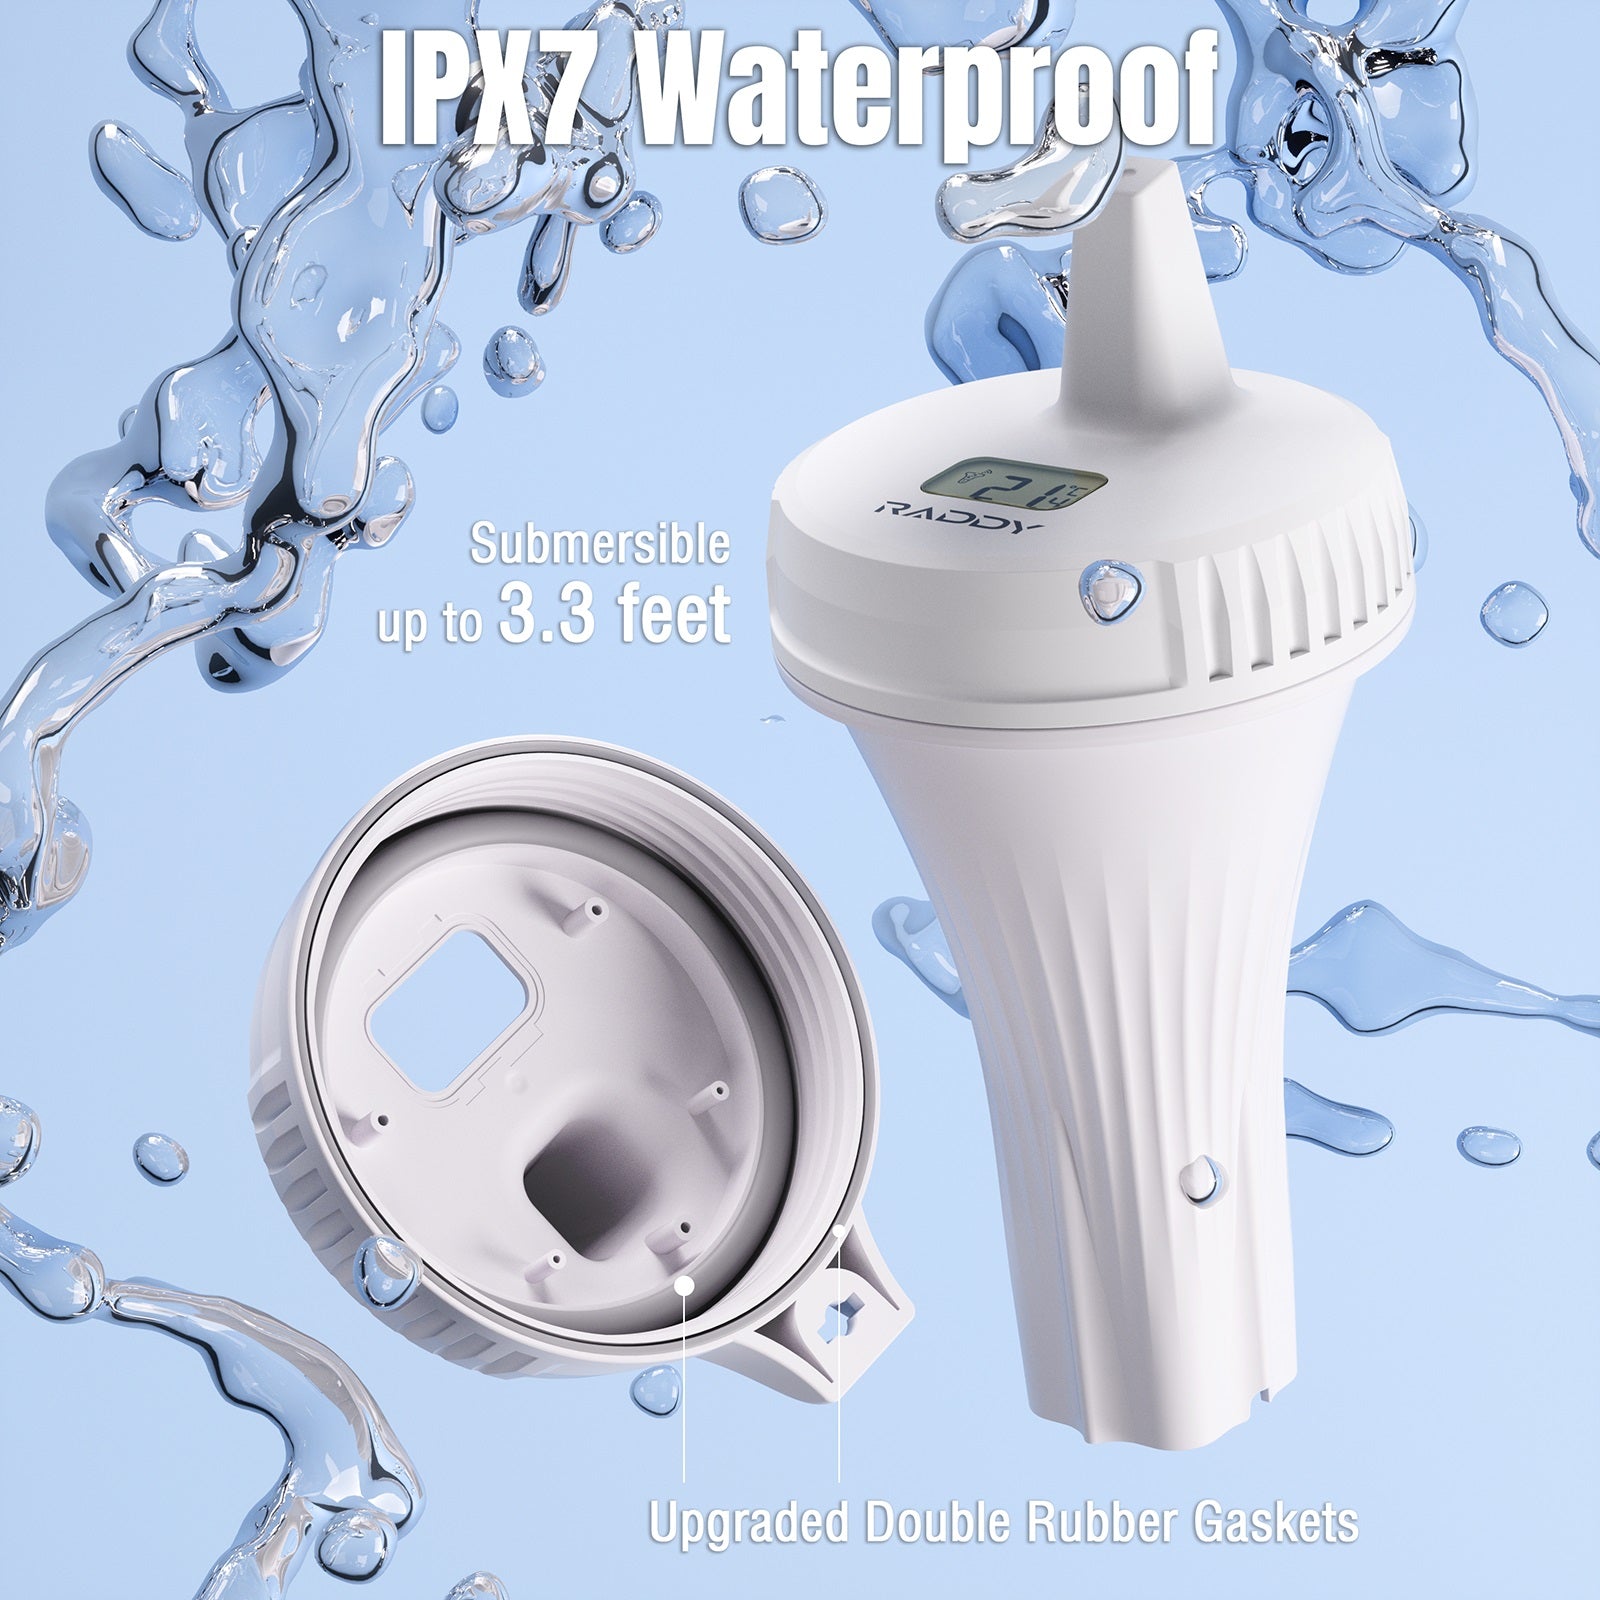 PT-2 Wireless Pool Thermometer